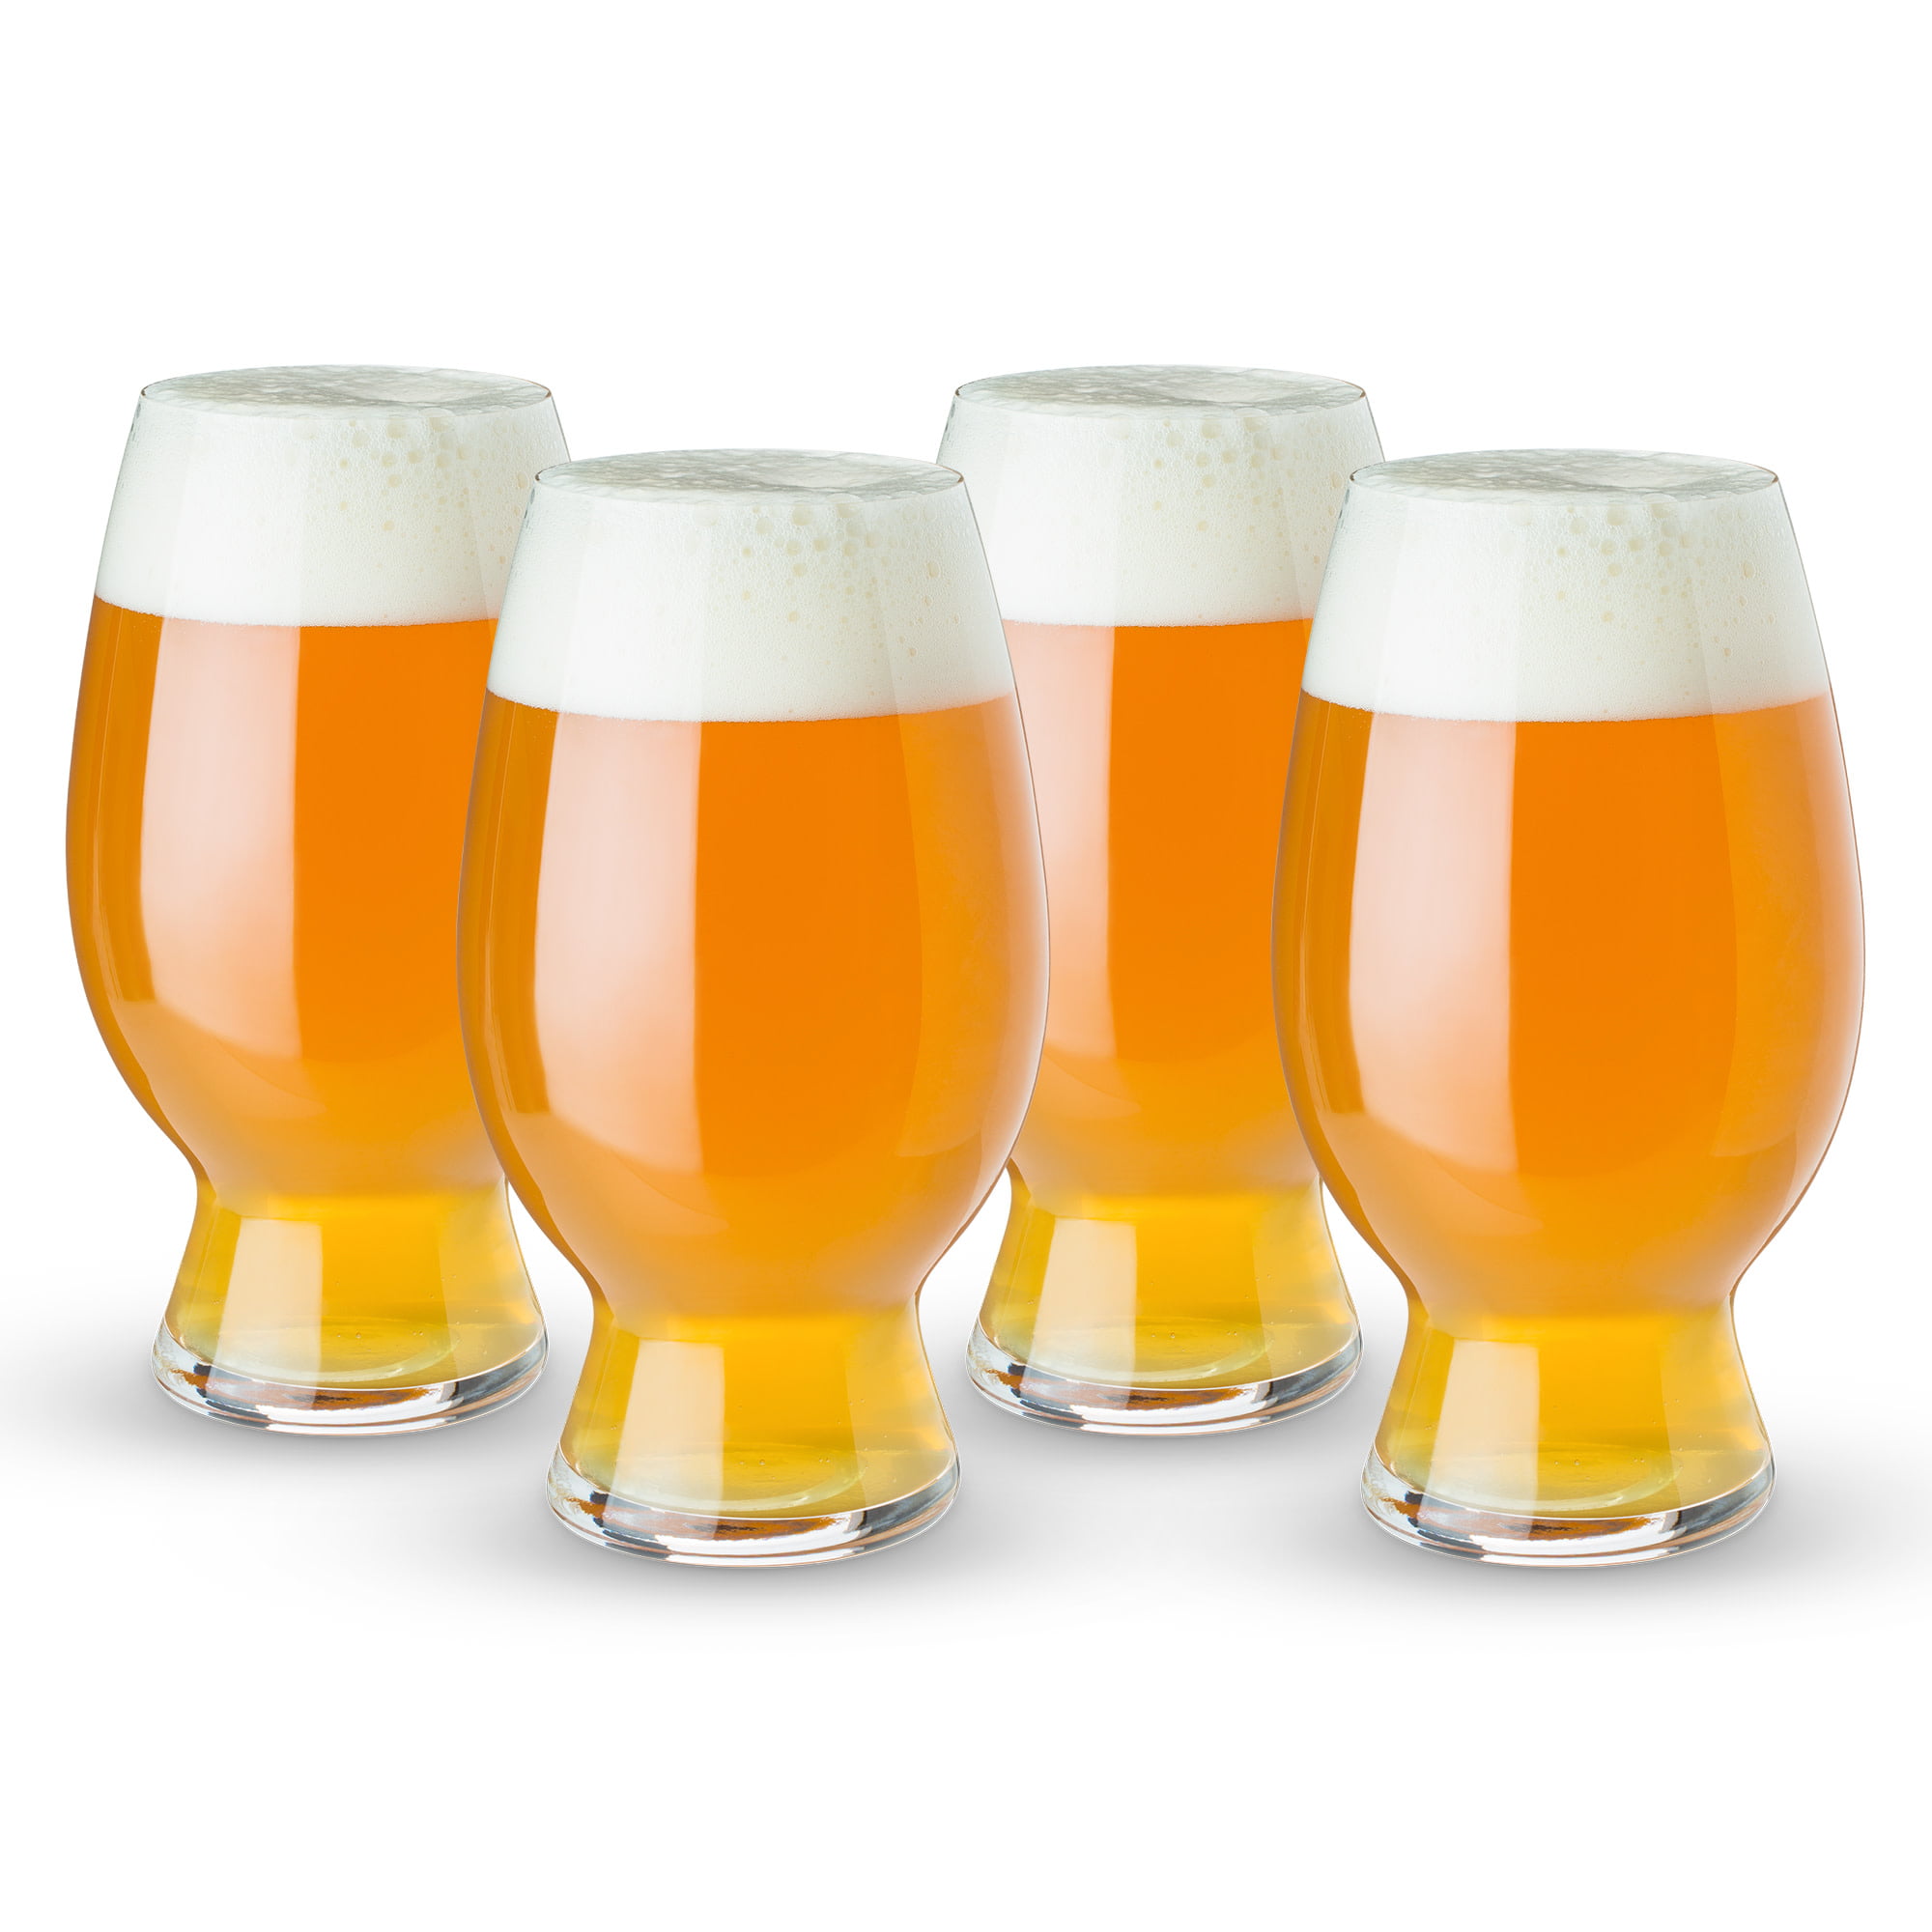 52.8 (Oz) Large Capacity Beer Glasses. For Bar,Beer,Wheat